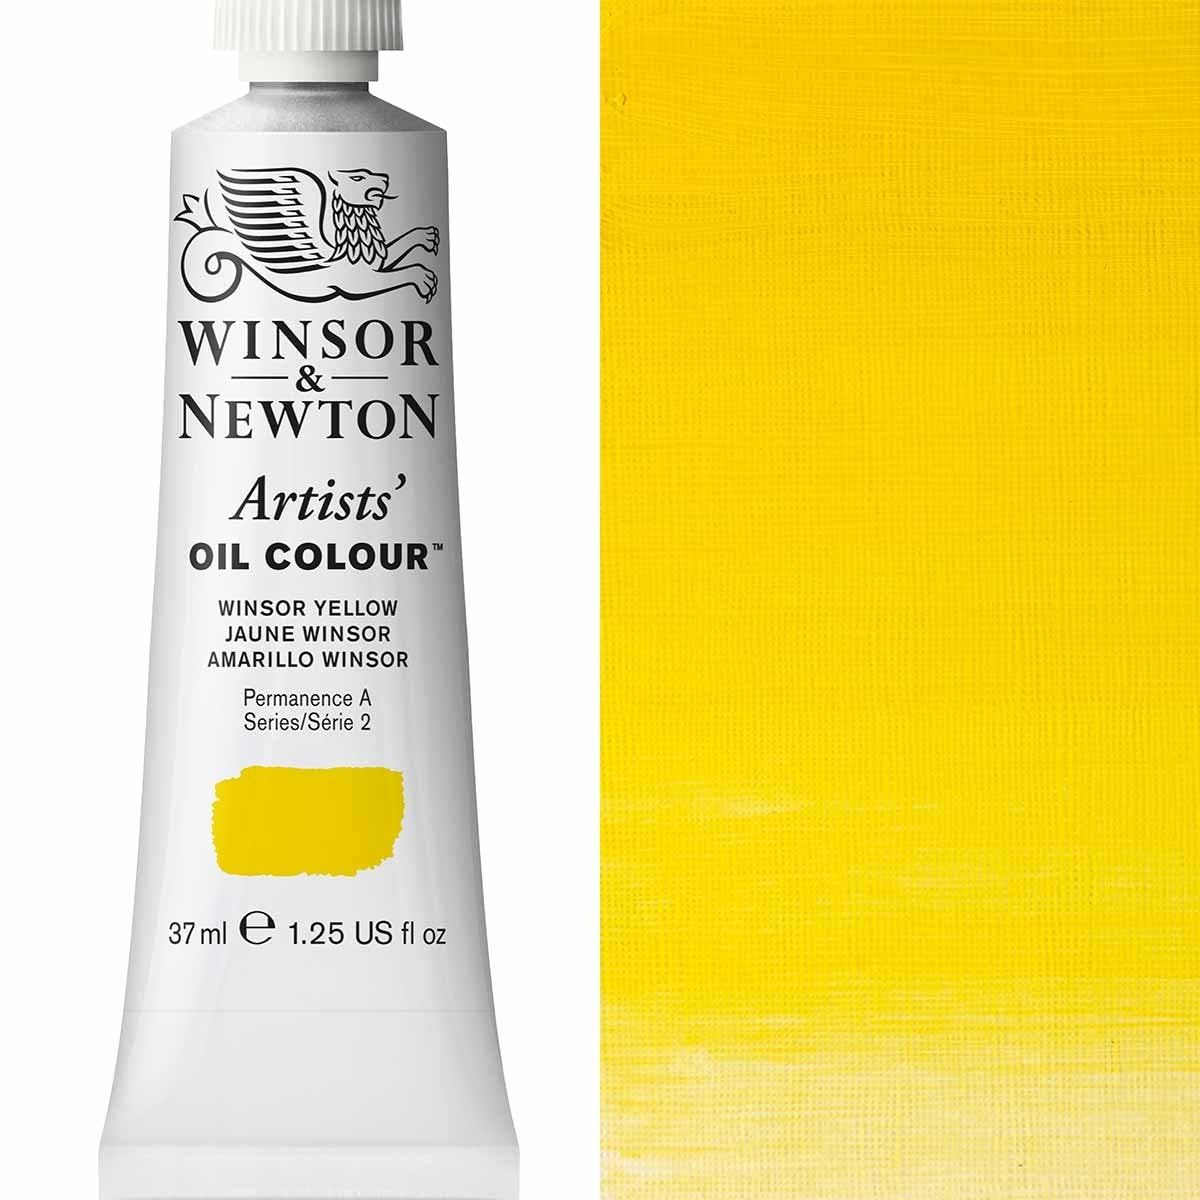 Winsor and Newton - Artists' Oil Colour - 37ml - Winsor Yellow